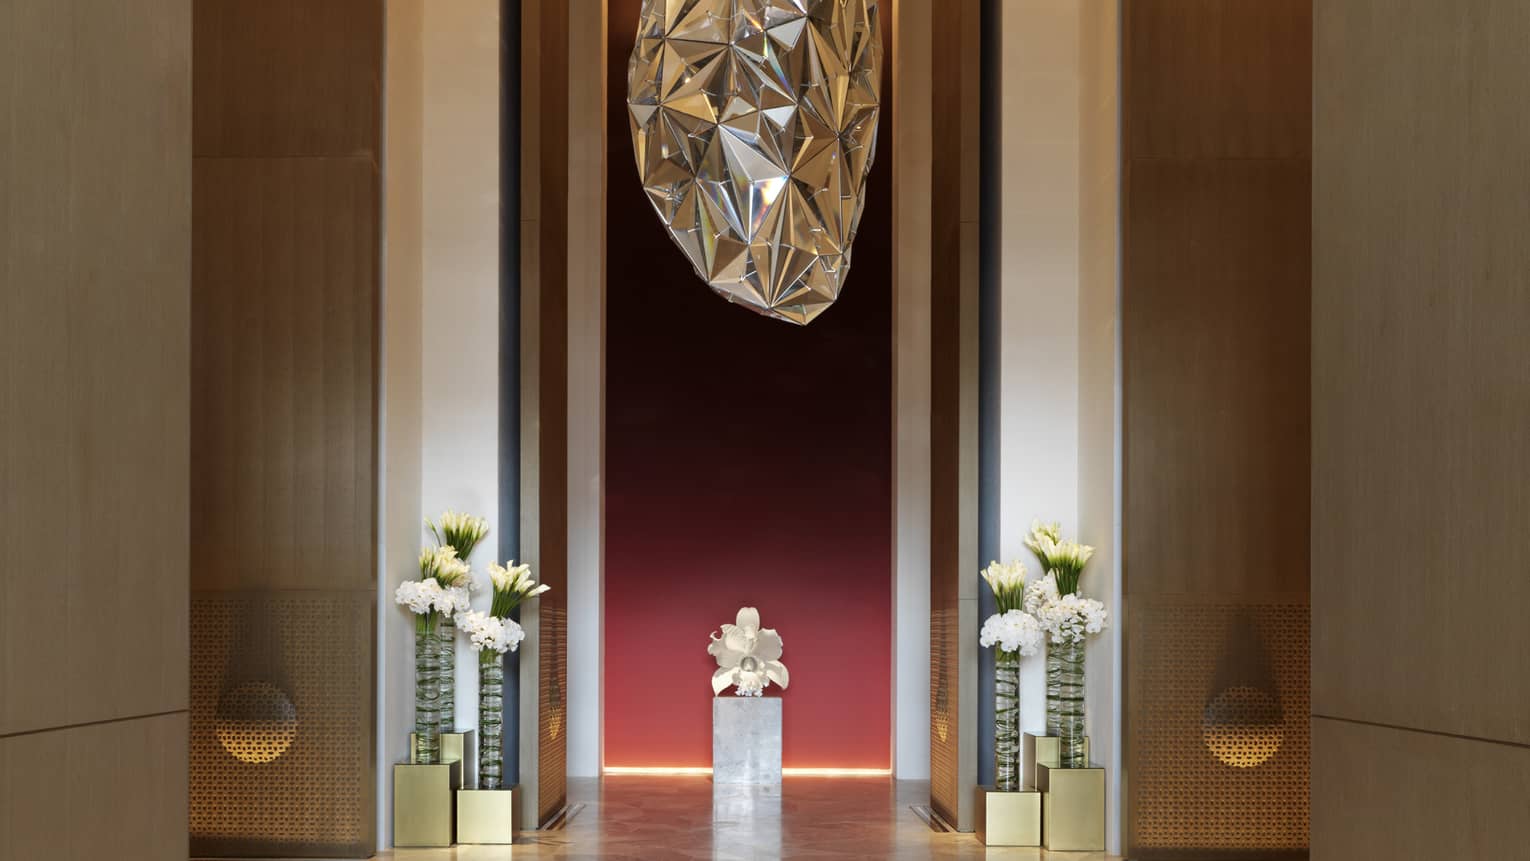 Large silver sculpture hanging above marble floors, tall vases with fresh white flowers